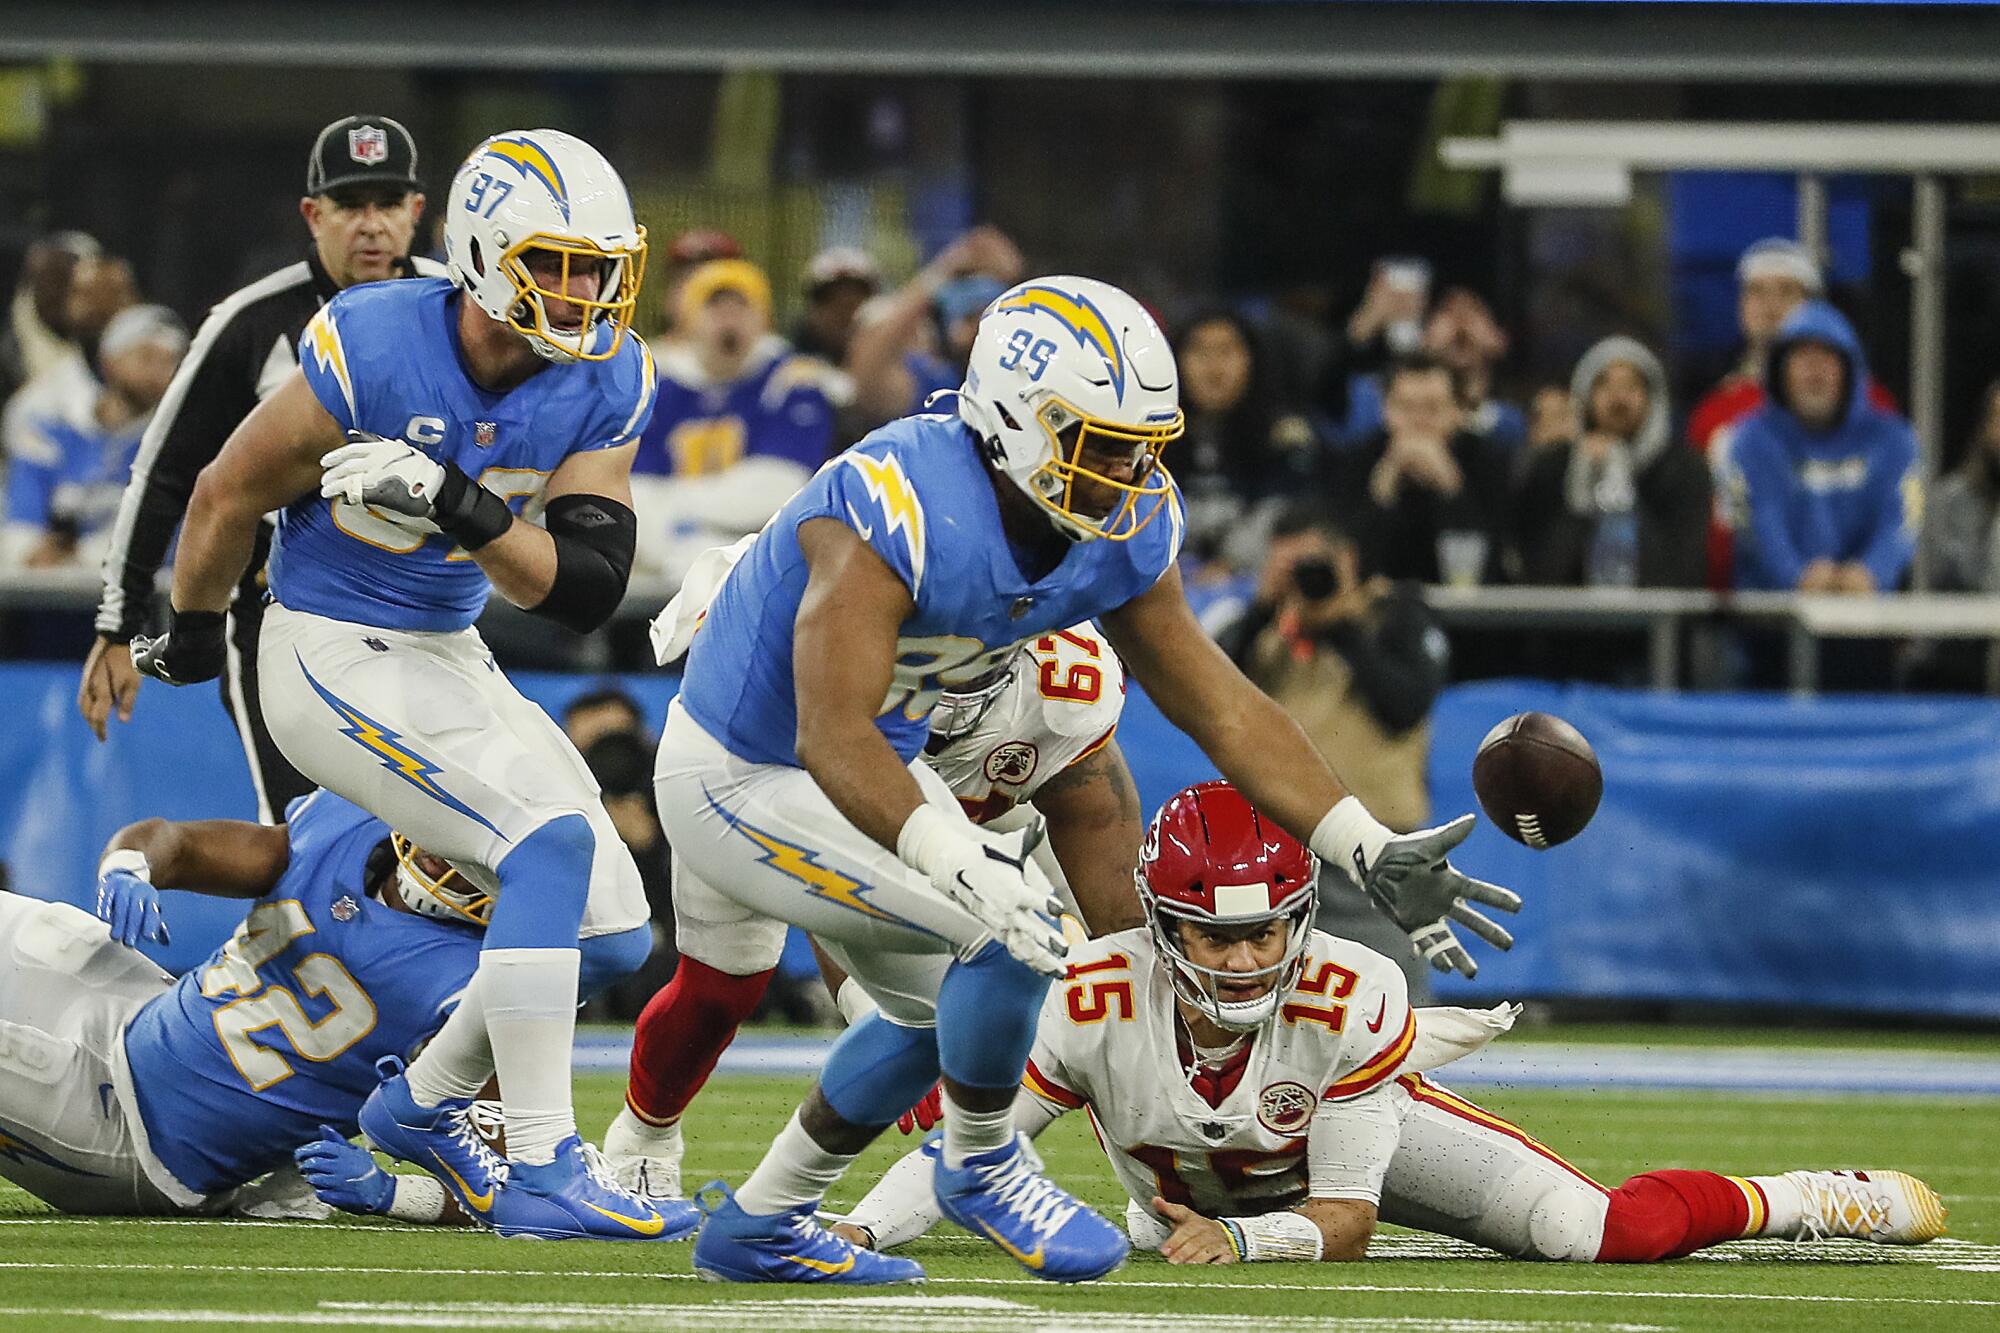 Chargers defensive end Jerry Tillery recovers a fumble by Kansas City Chiefs quarterback Patrick Mahomes.